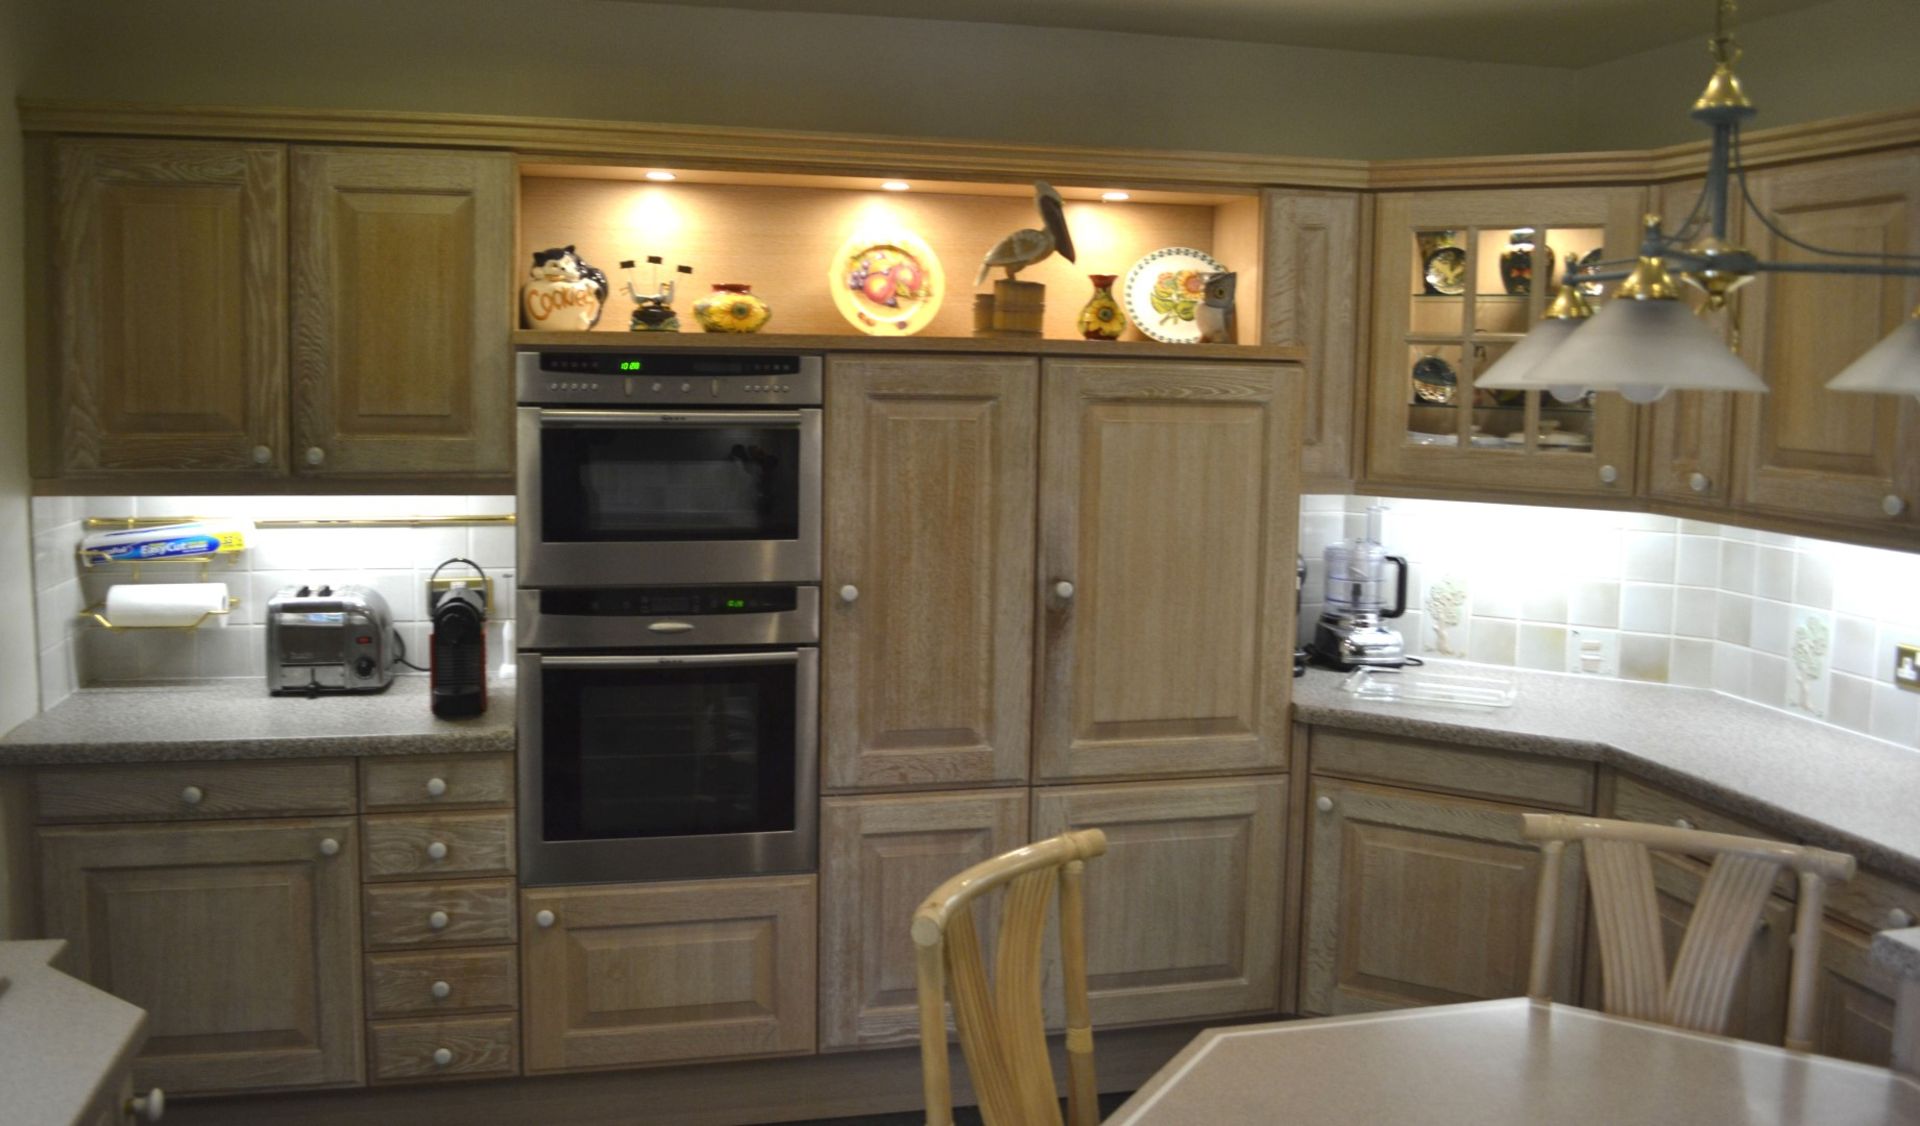 1 x SieMatic Bespoke Solid Wood Limed Oak Fitted Kitchen With Miele, Neff And Gaggenau Appliances - Image 72 of 95